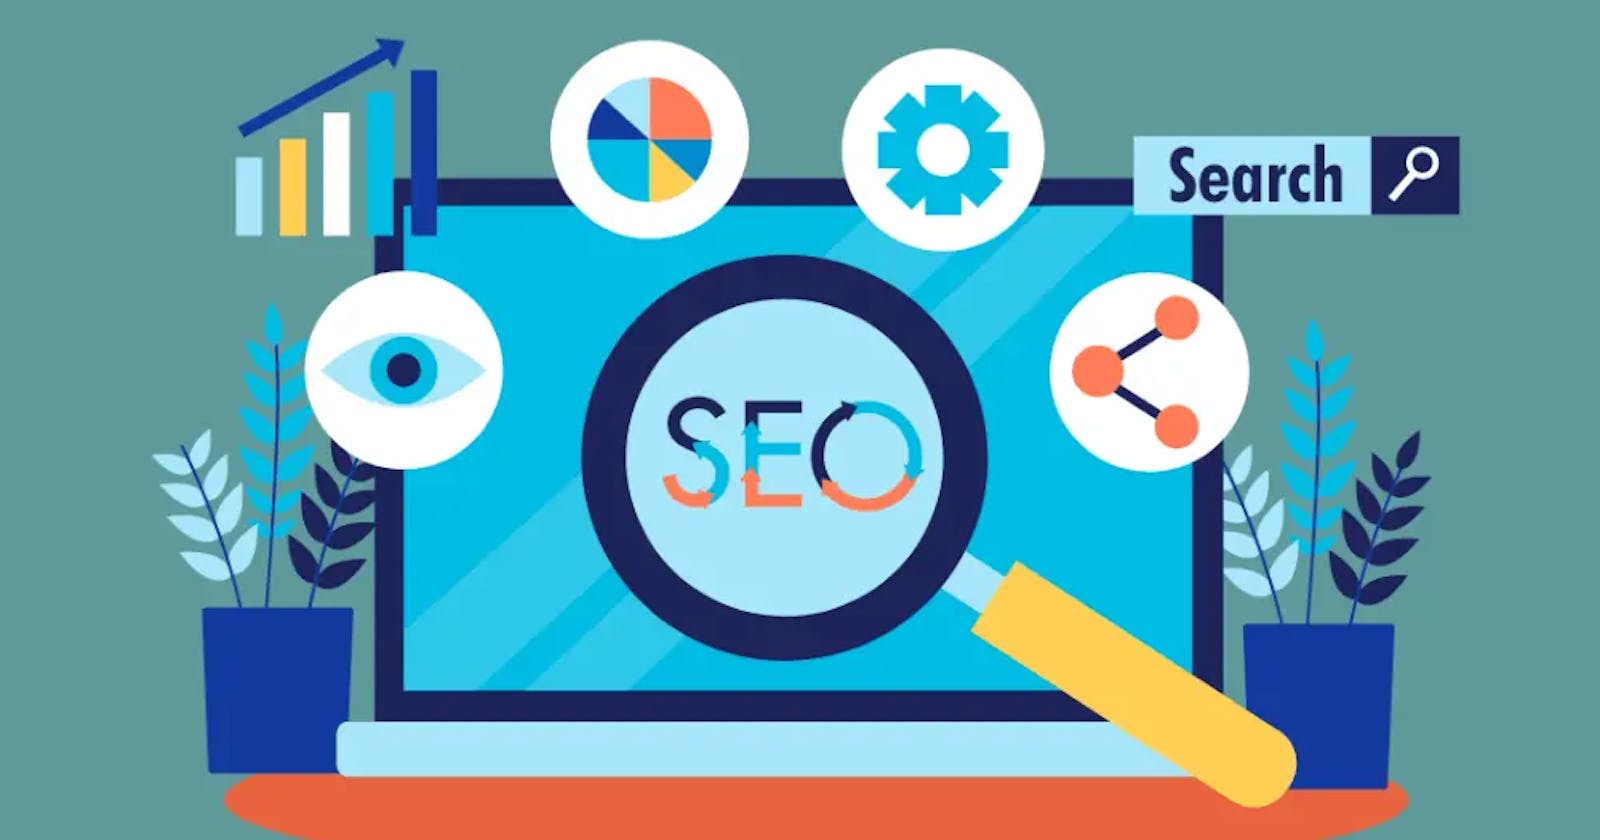 How To Start A SEO Consulting Business?